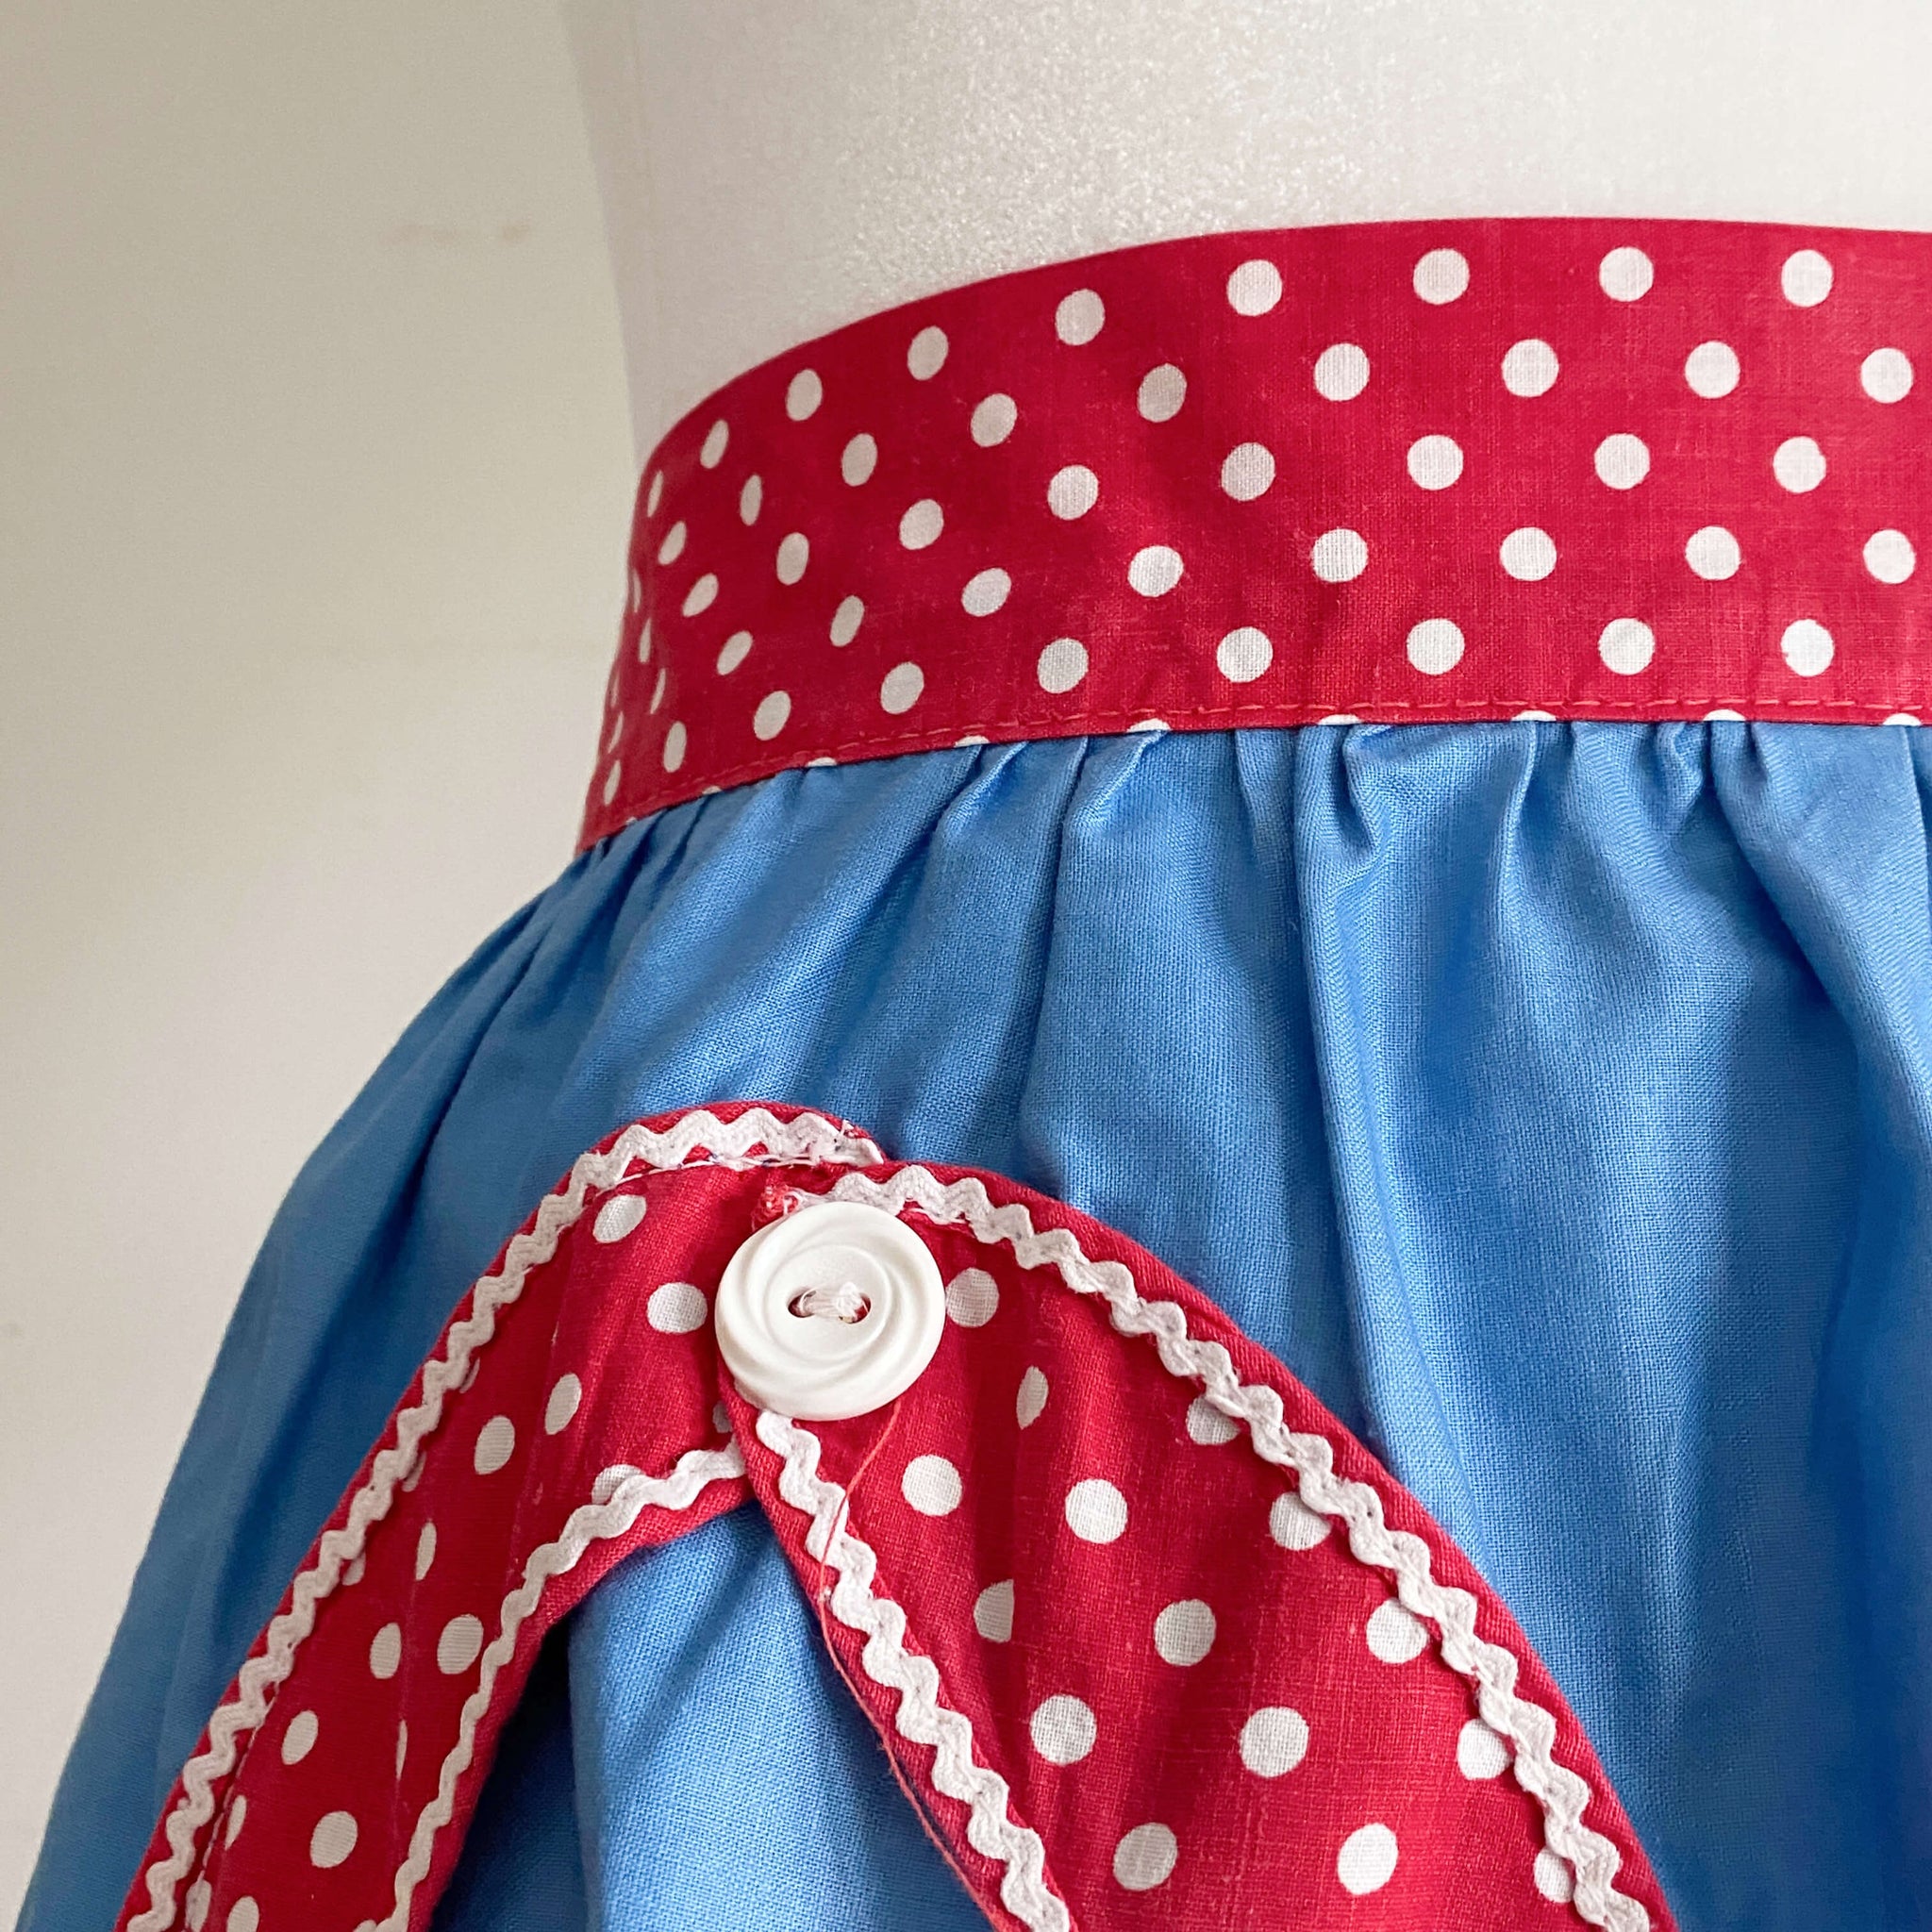 Vintage Red White and Blue Half-Apron